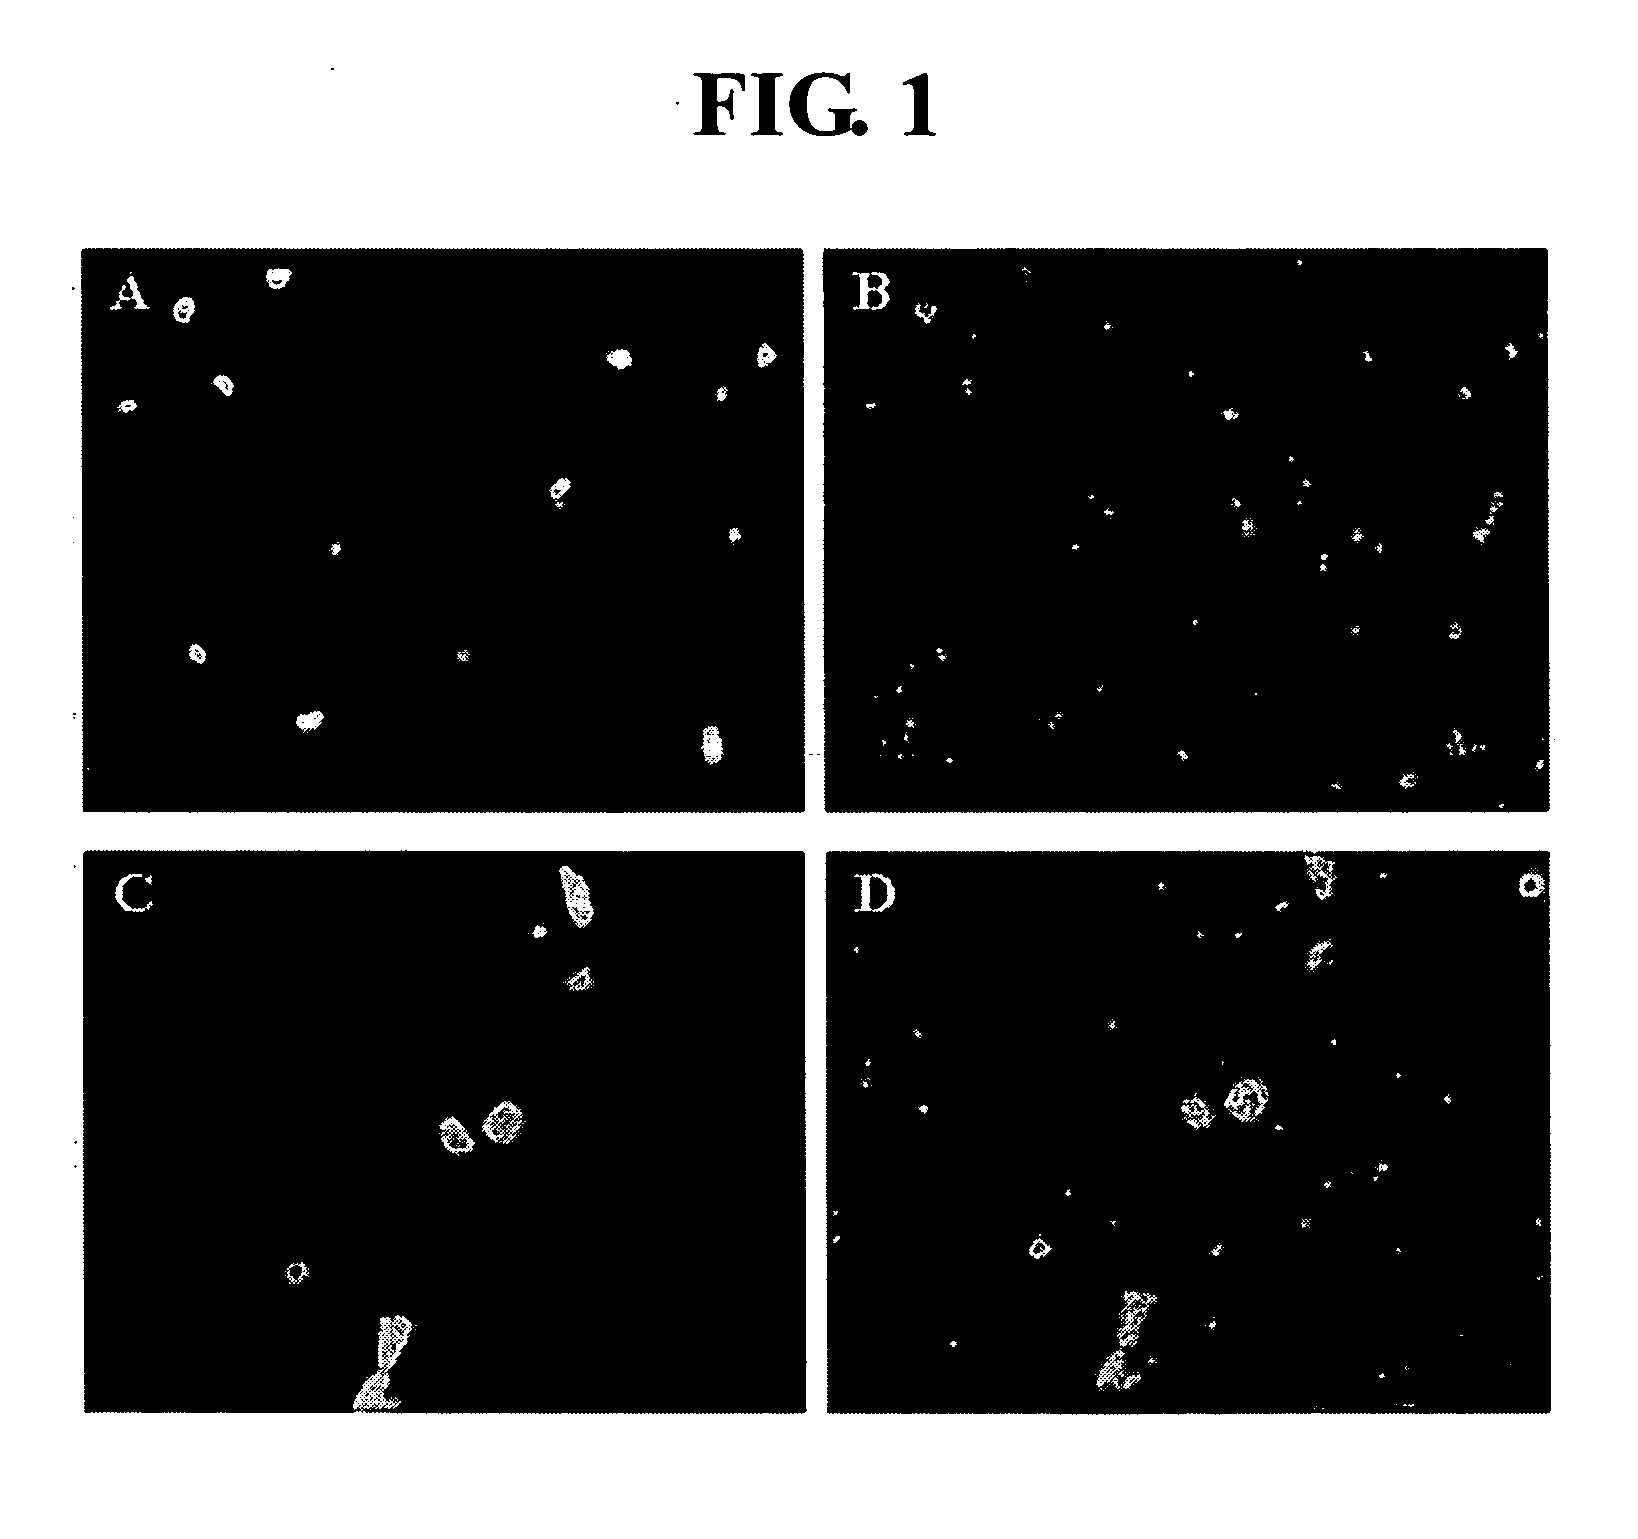 Method for culturing and proliferating hematopoietic stem cells and progenitor cells using human endometrial cells